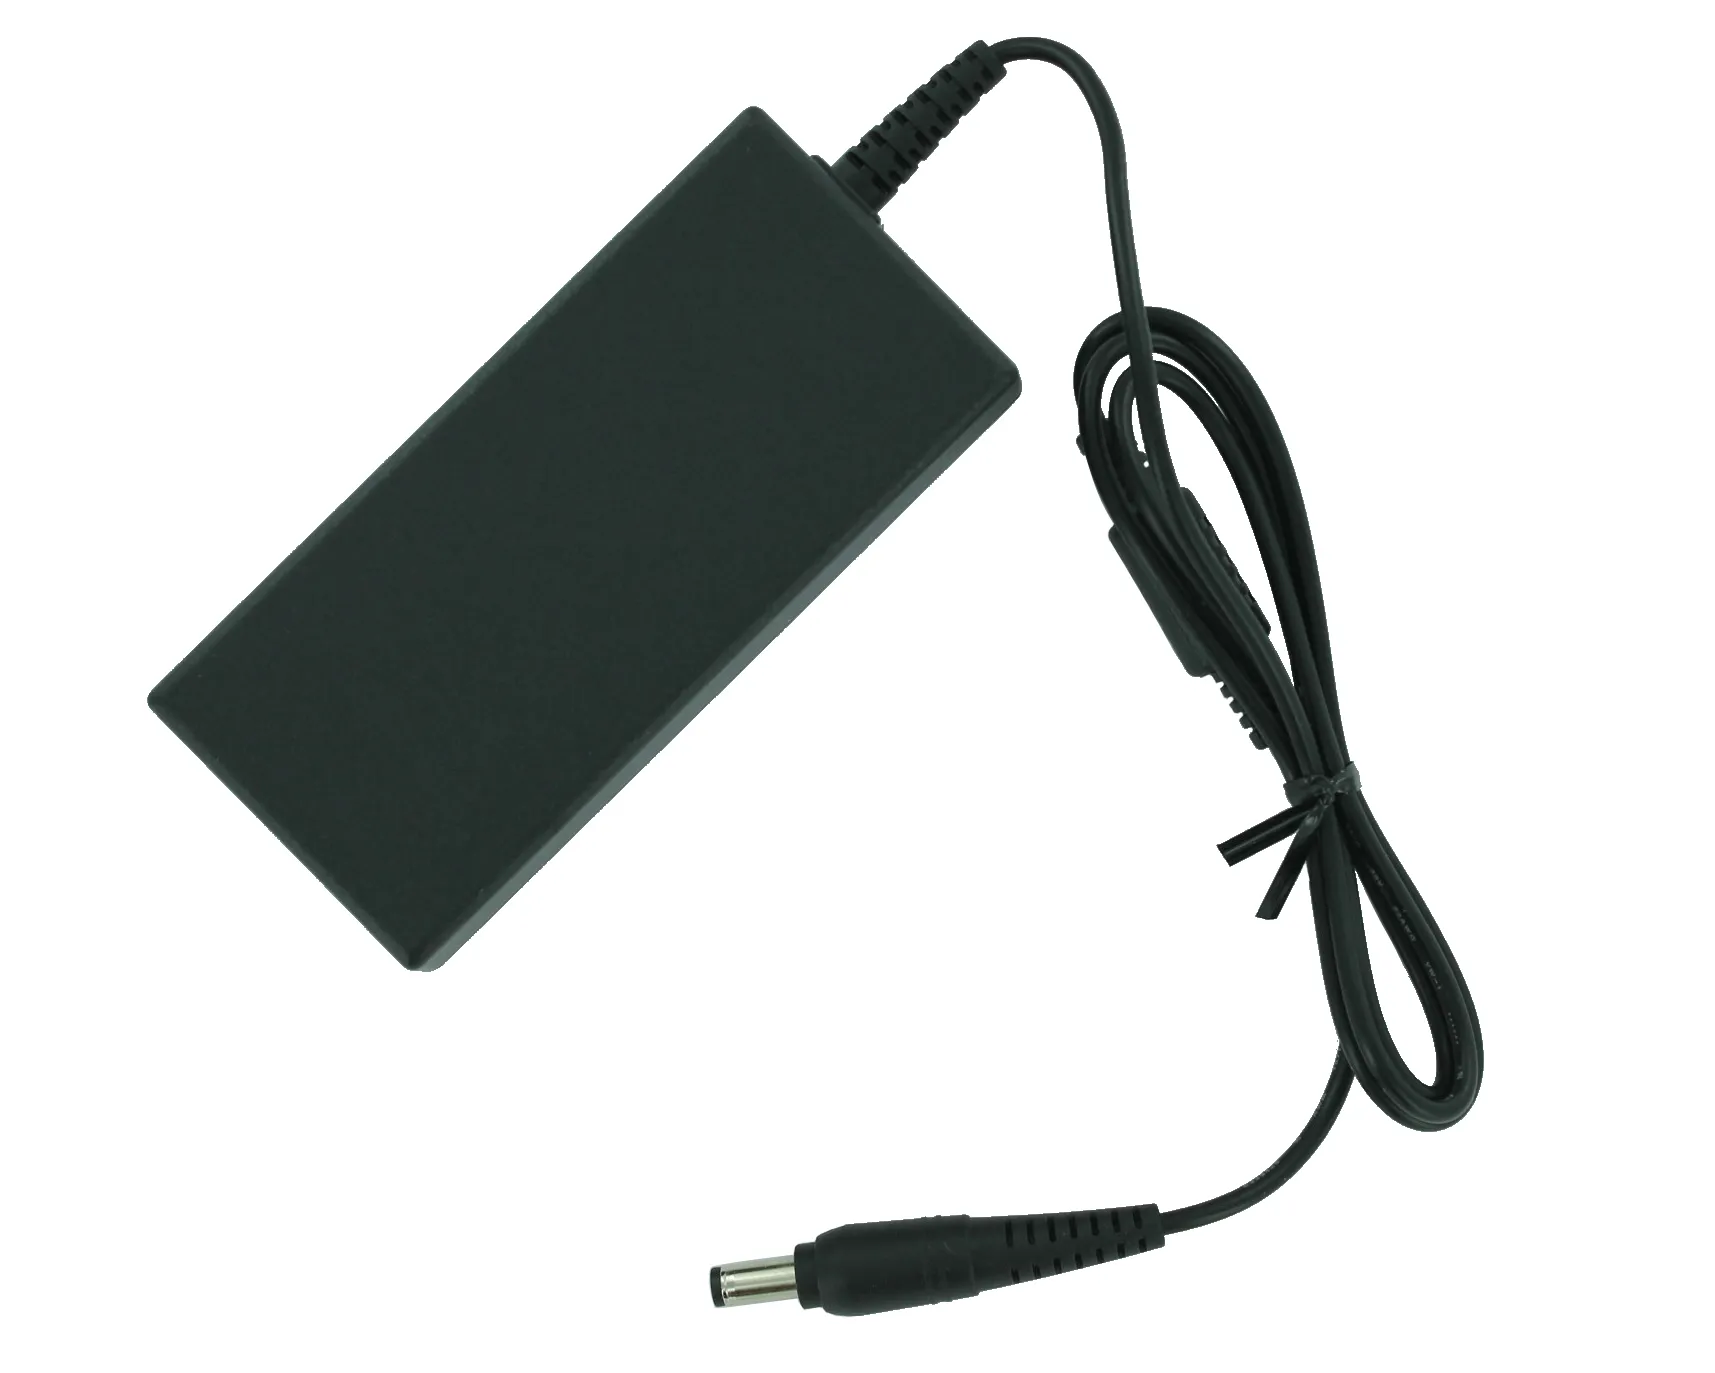 HP 290 G1 MICROTOWER PC - 3EC14EA Charger (AC Adapter) 911754-001